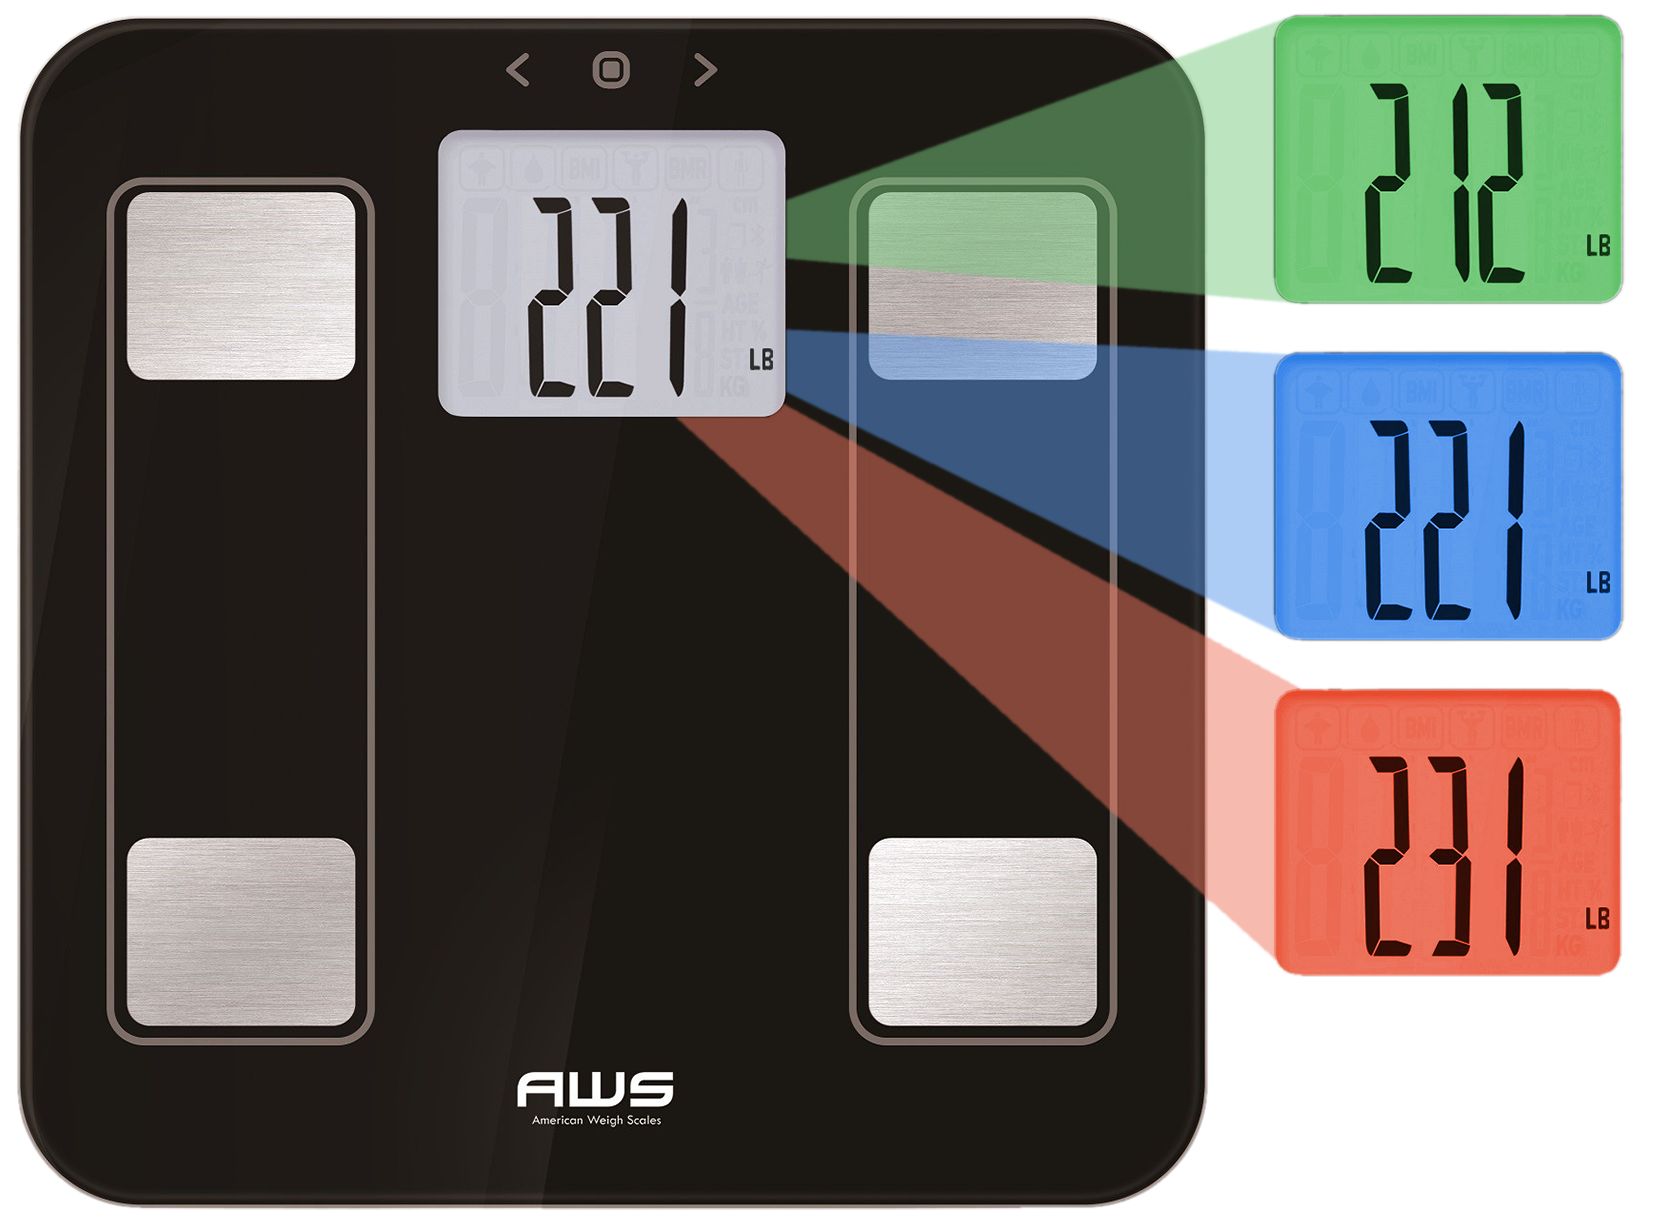 American Weigh Scales Digital Body Analysis Scale